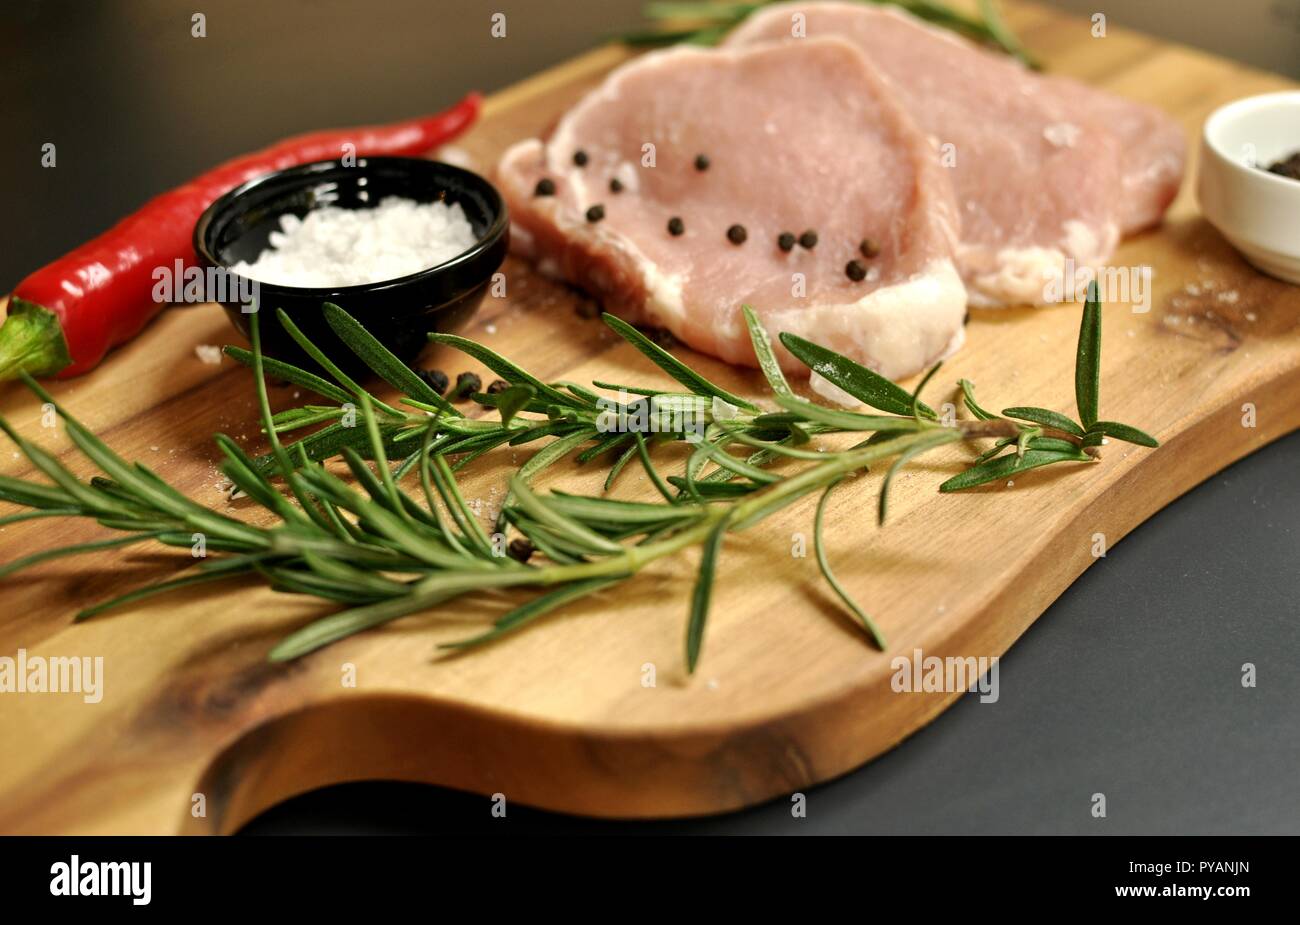 Raw fresh uncooked sliced pork fillet  dish with rosemary, pepper, salt, red chili pepper on wooden board and black background. Top side view Stock Photo